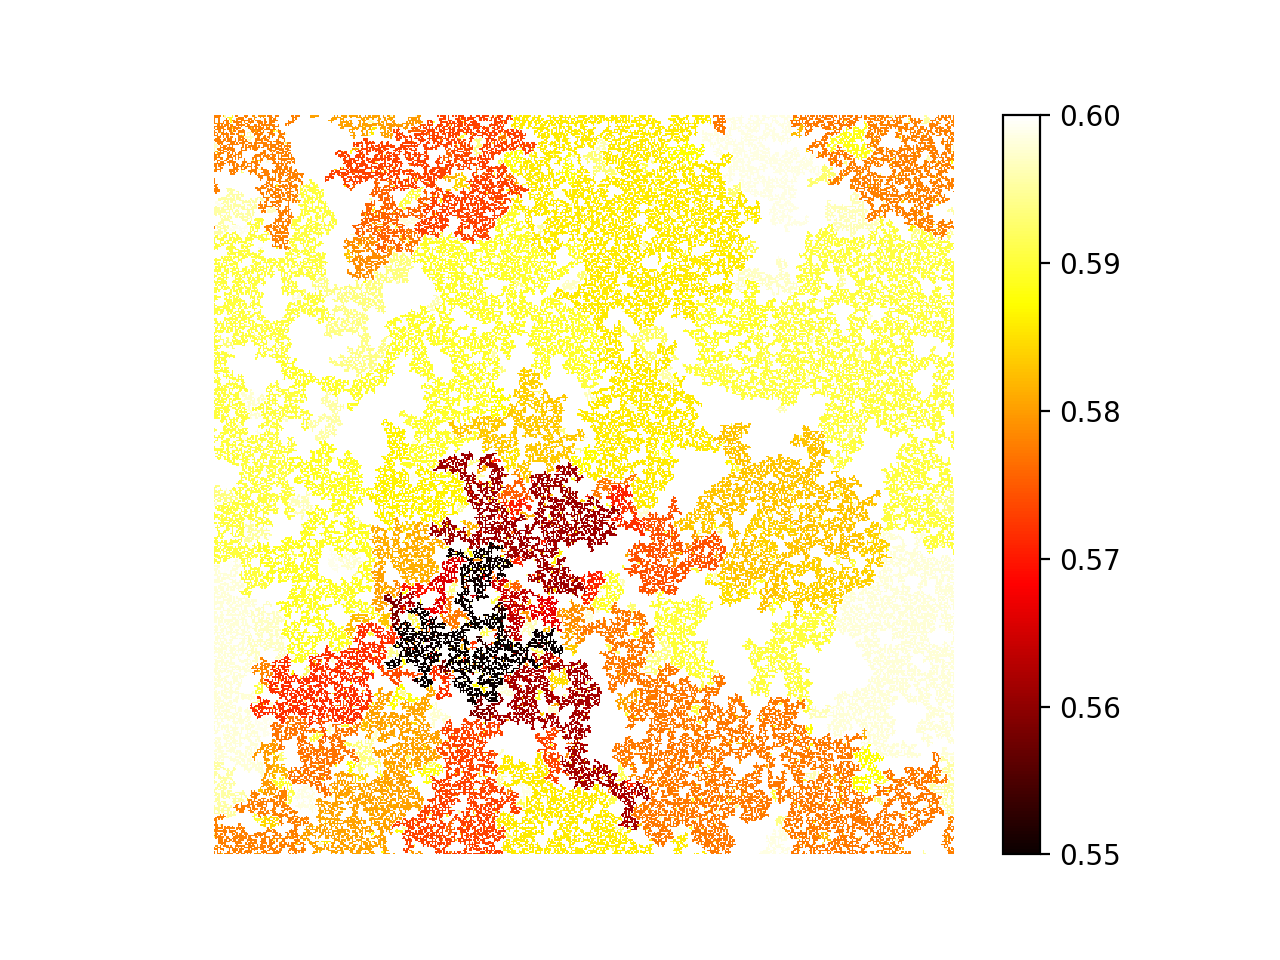 Each non-white location is colored by the smallest value of p for which it is part of the largest cluster in the grid.